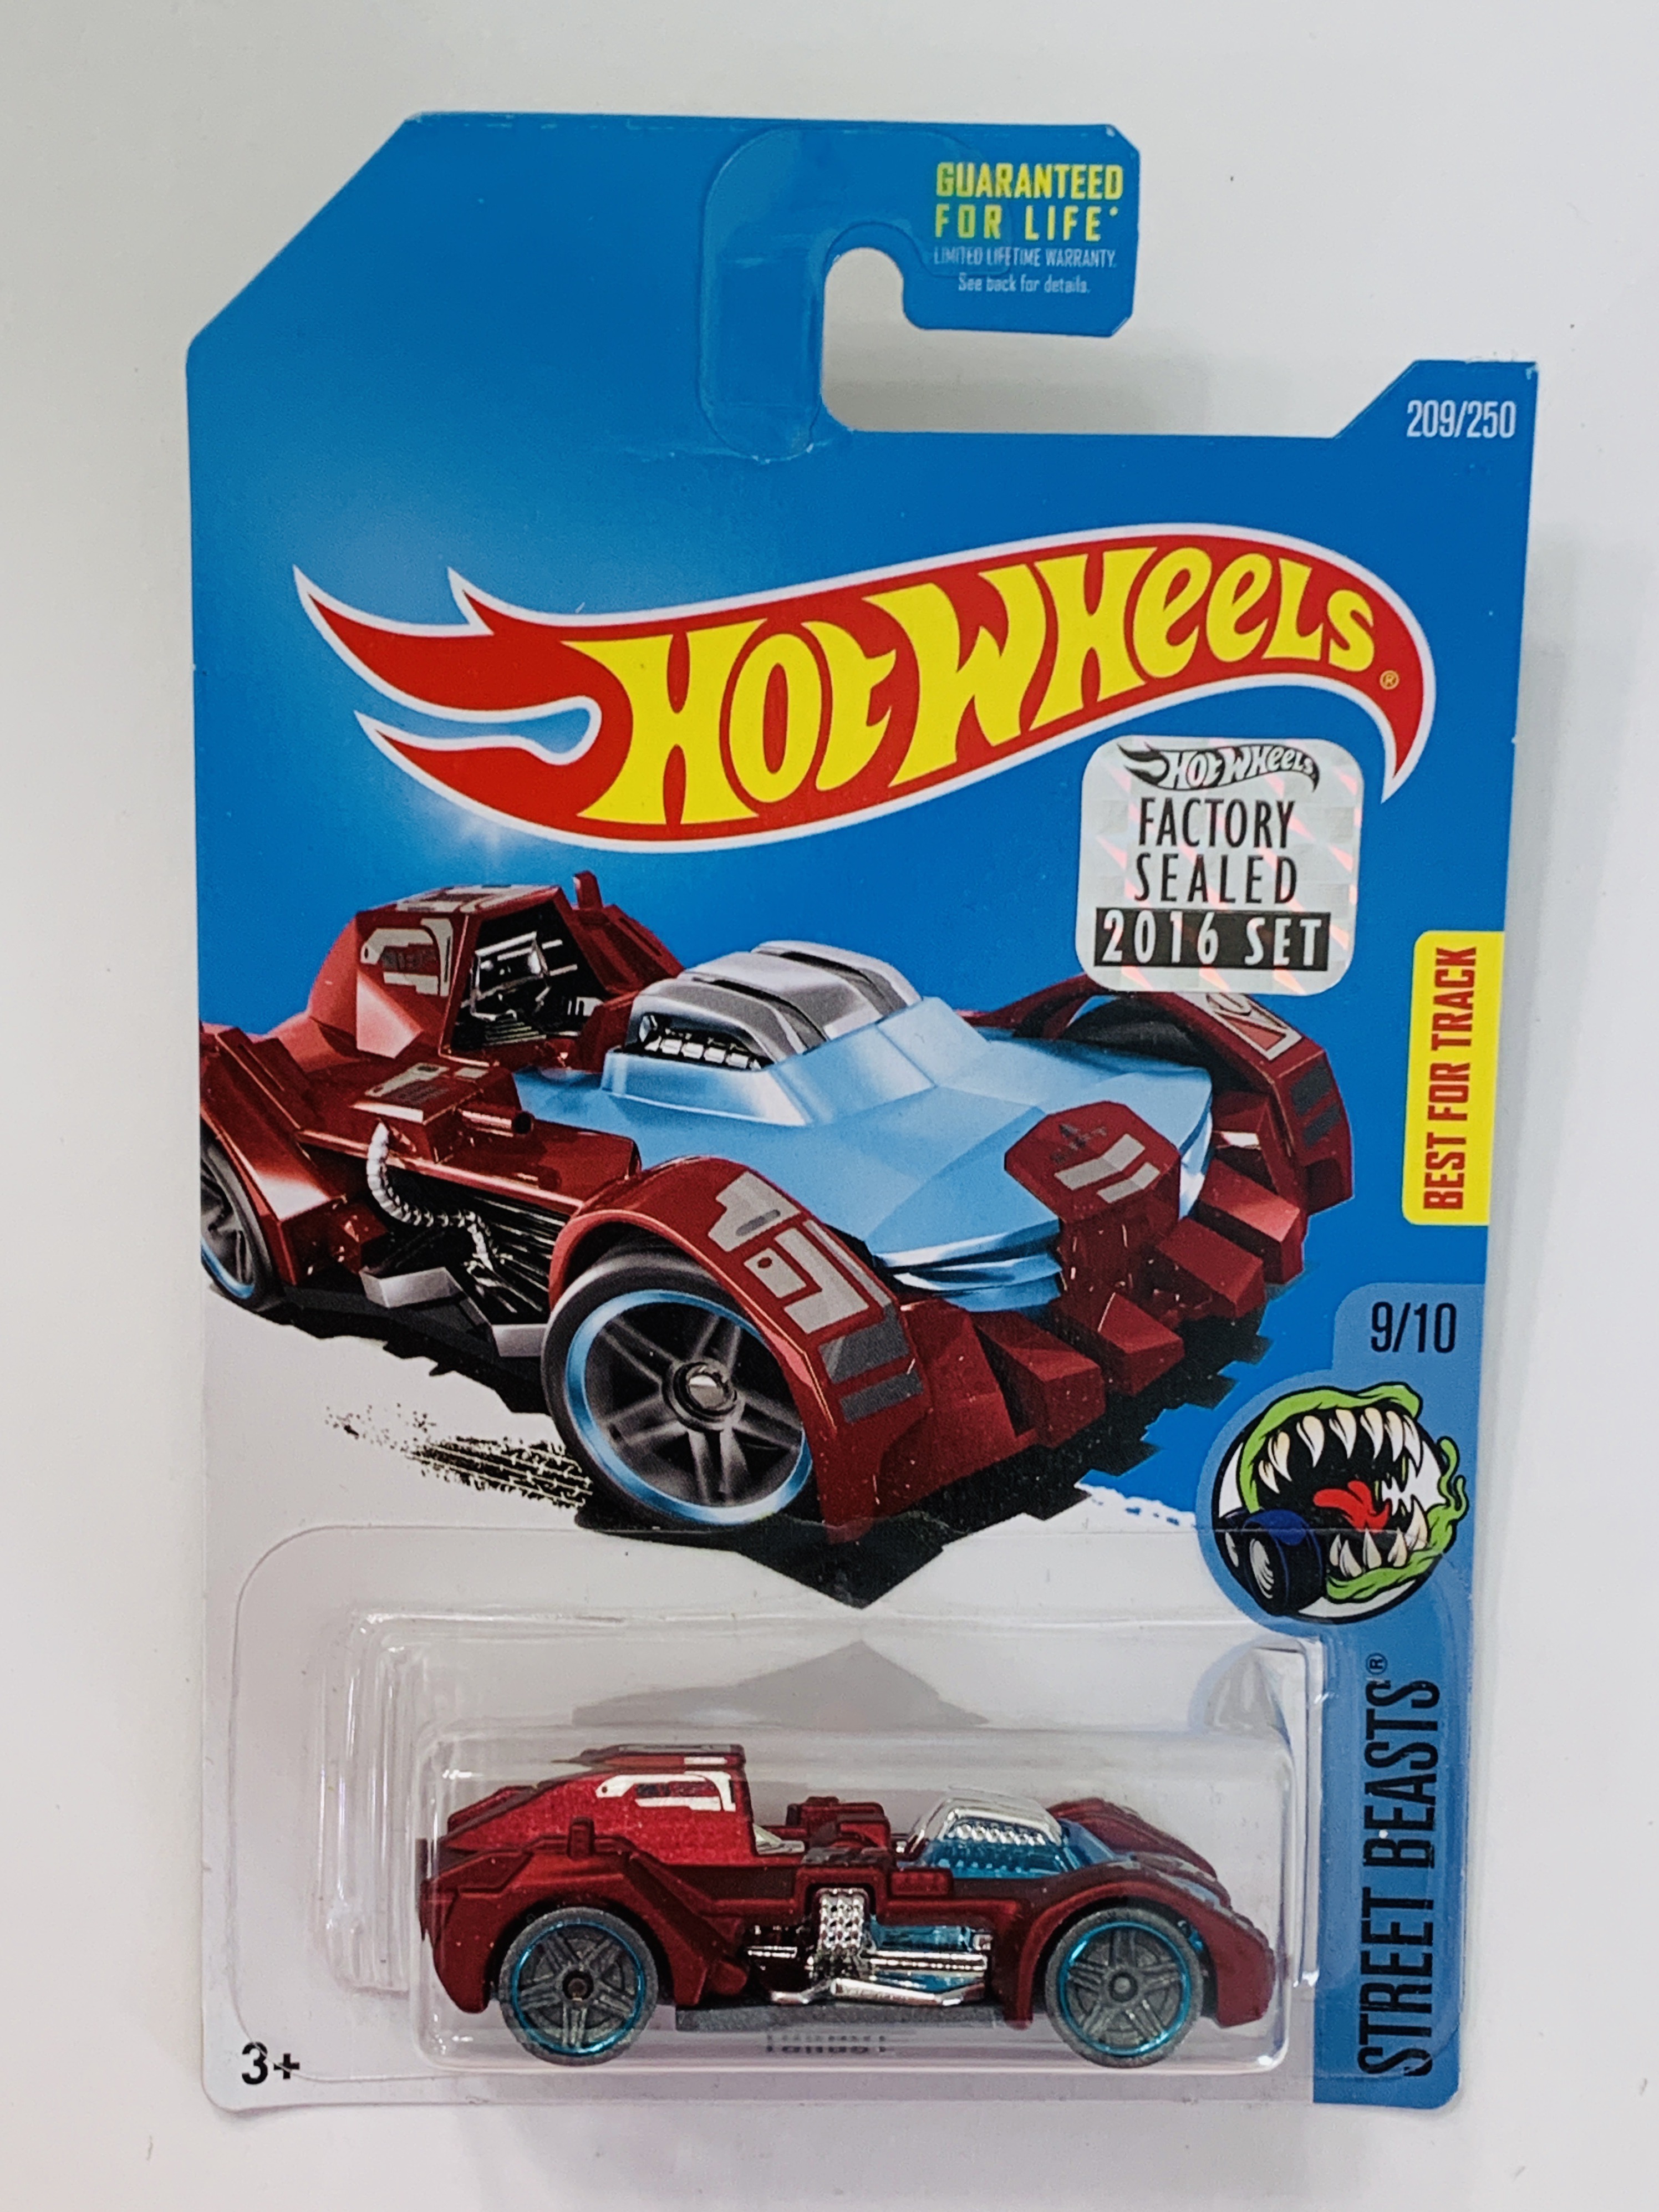 Hot Wheels #209 2016 Factory Set Turbot - Red